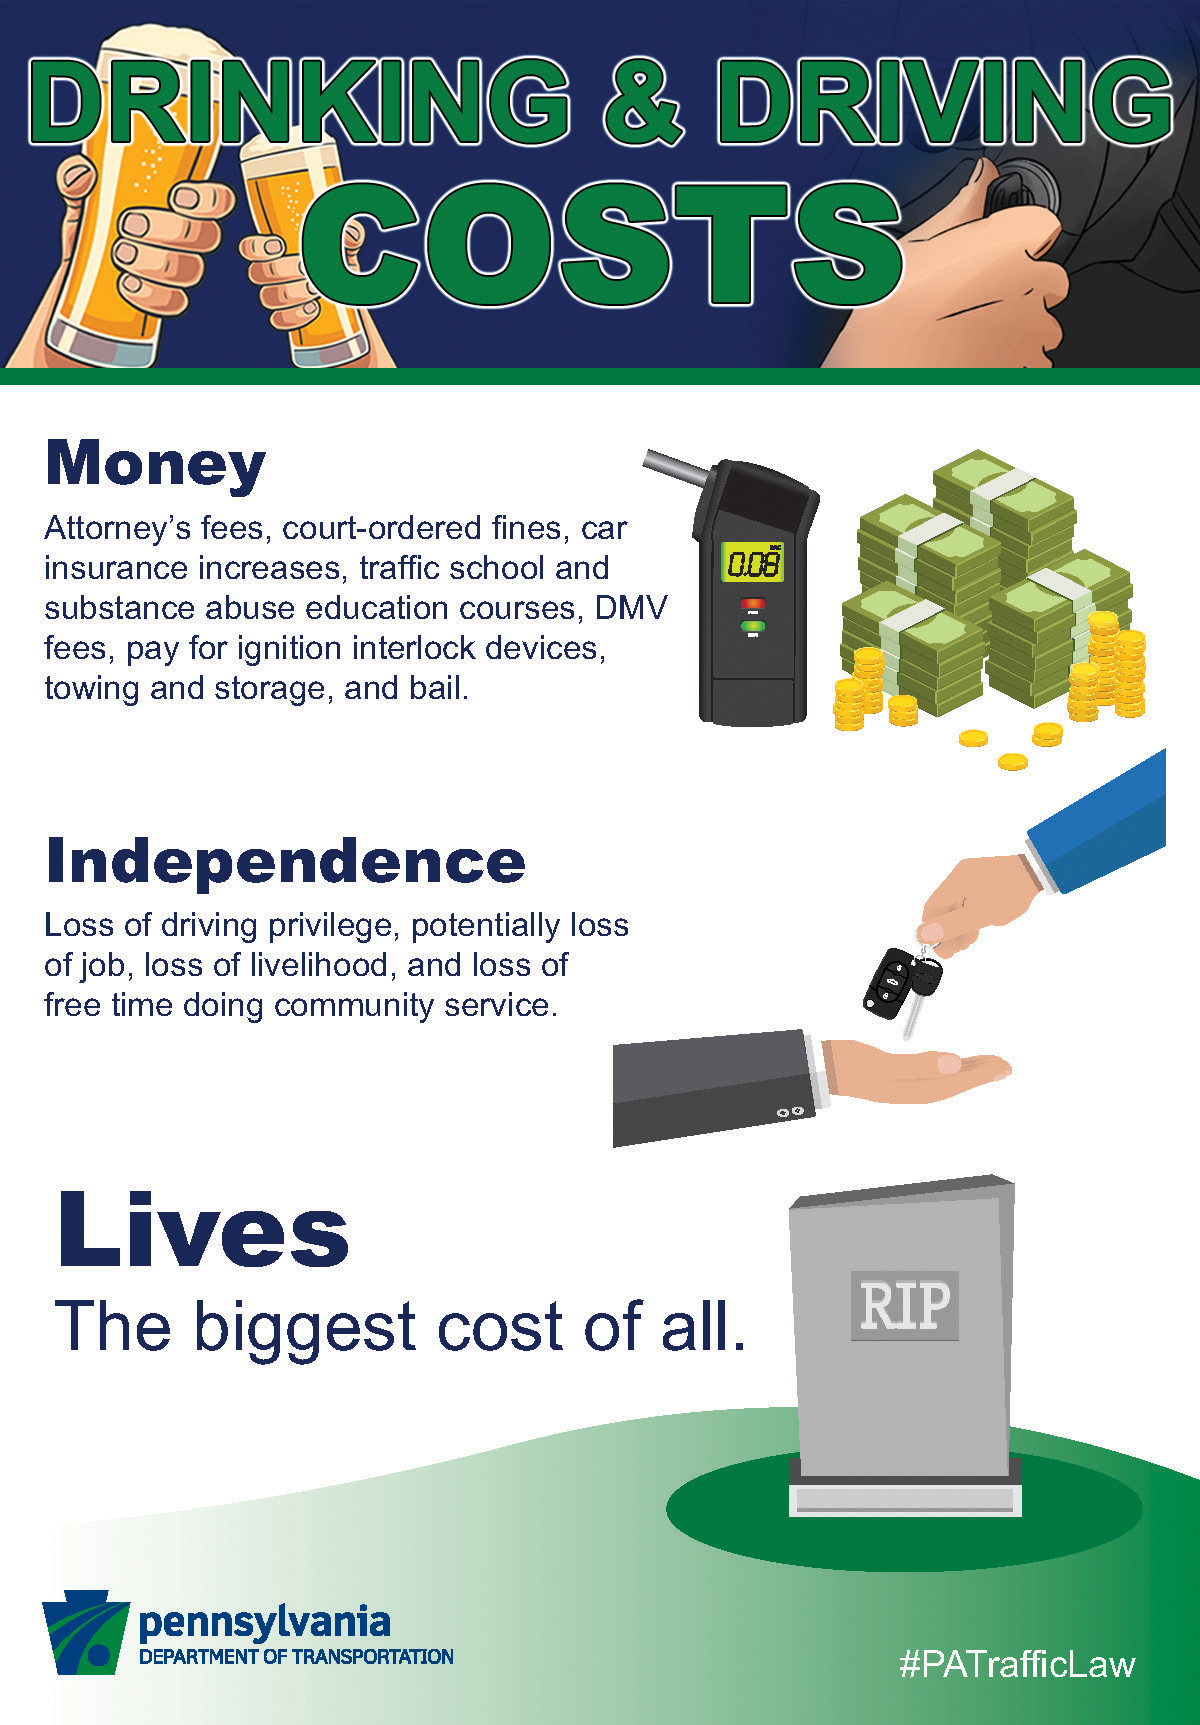 costs of drinking and driving infographic